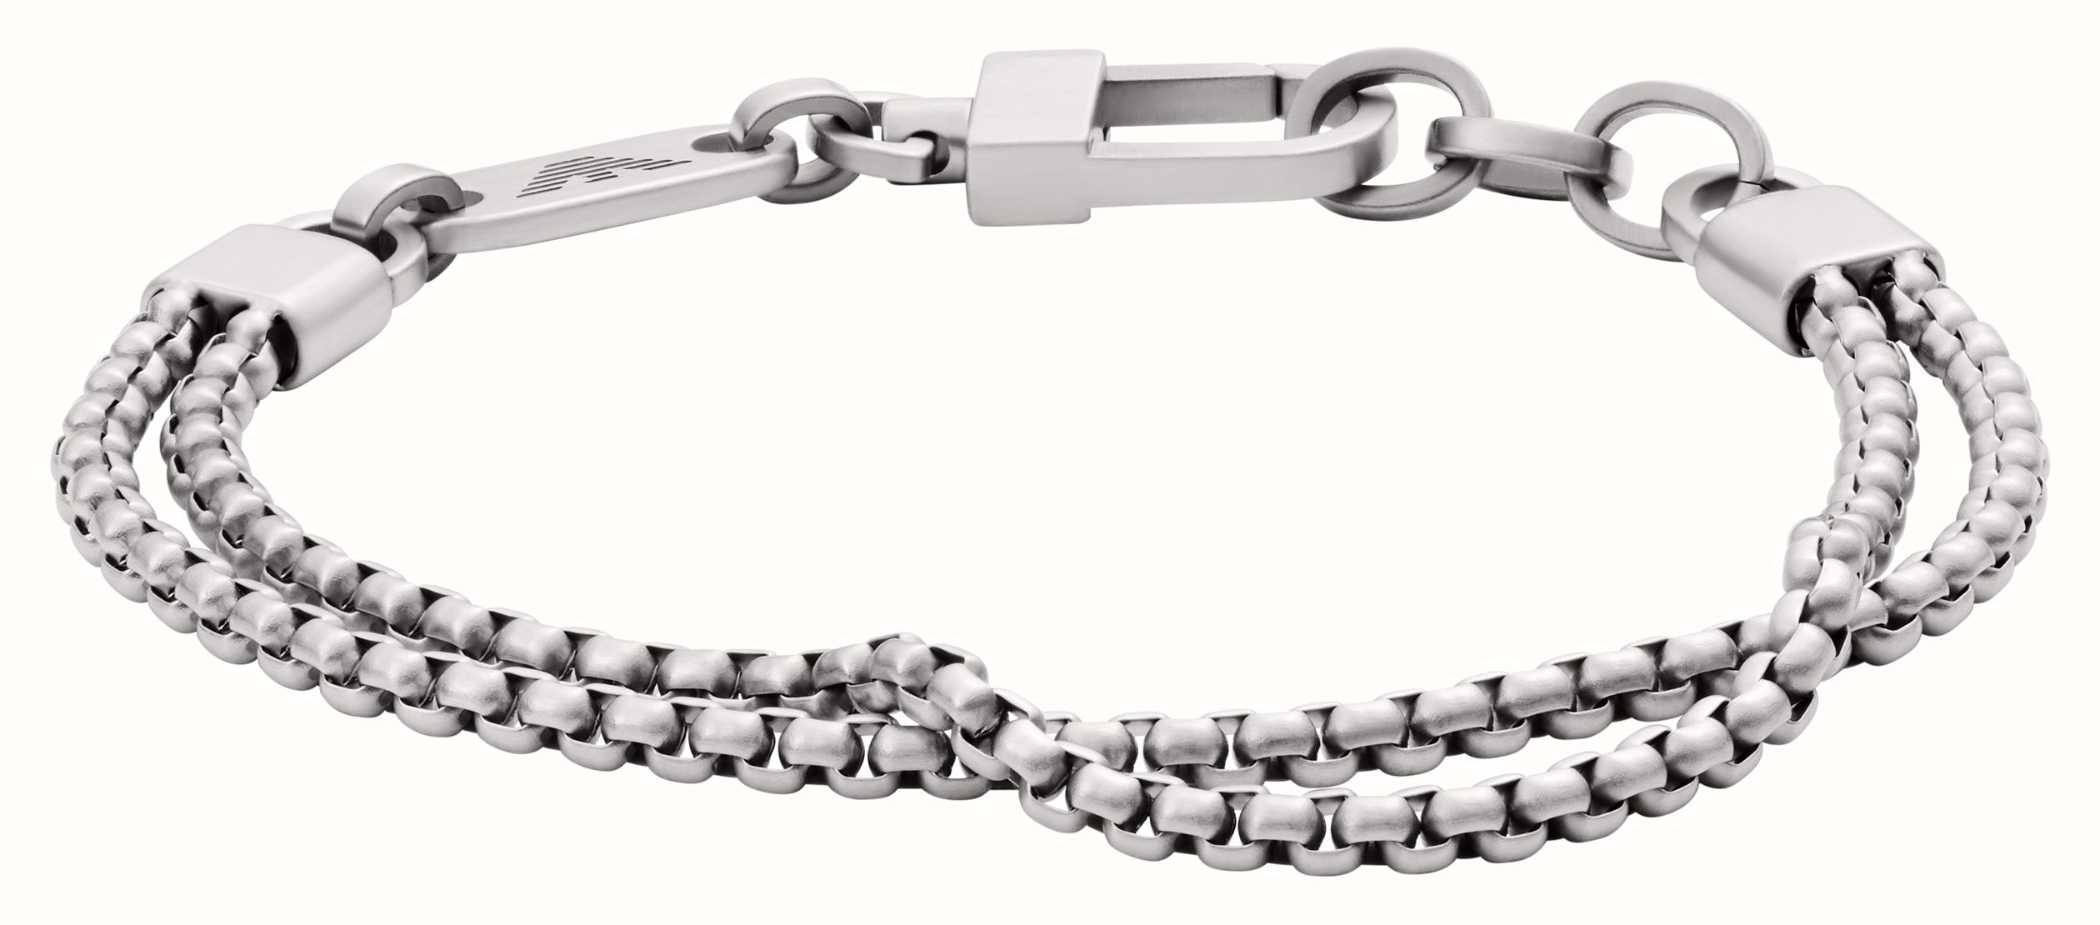 Emporio Armani Men's Asymmetrical Stainless Steel Chain Bracelet EGS2805040  - First Class Watches™ USA